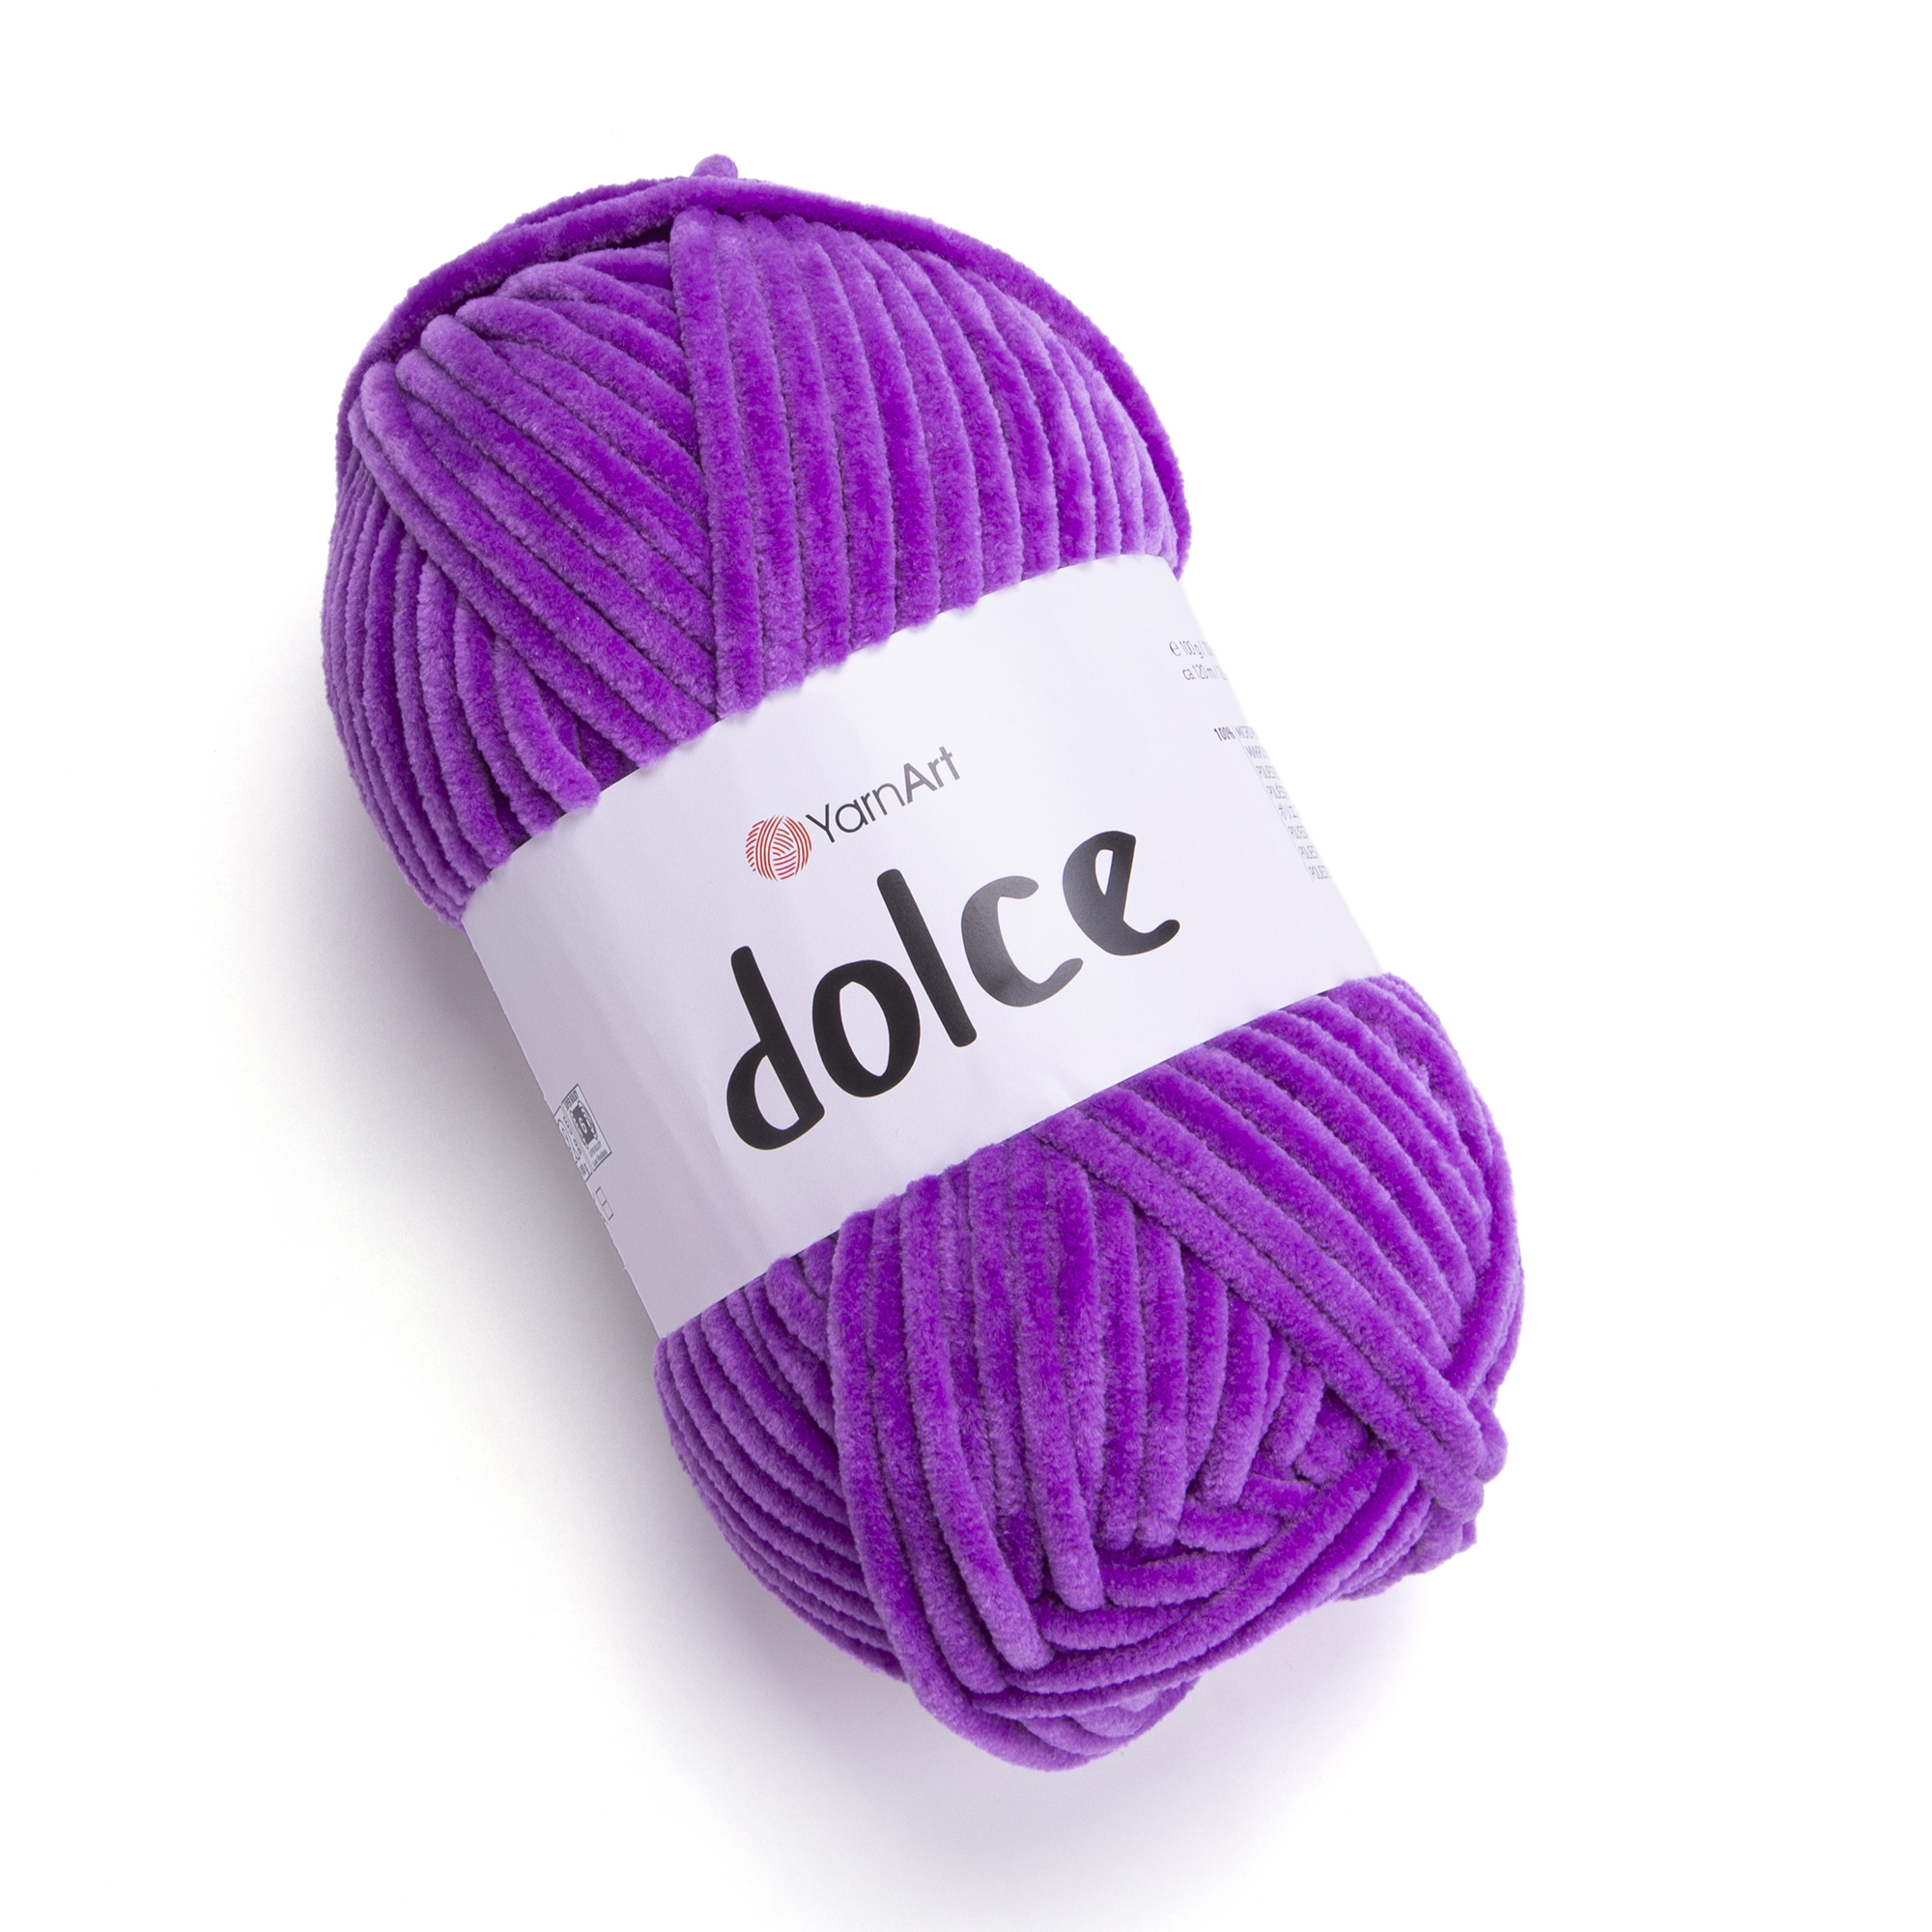 Dolce – 788